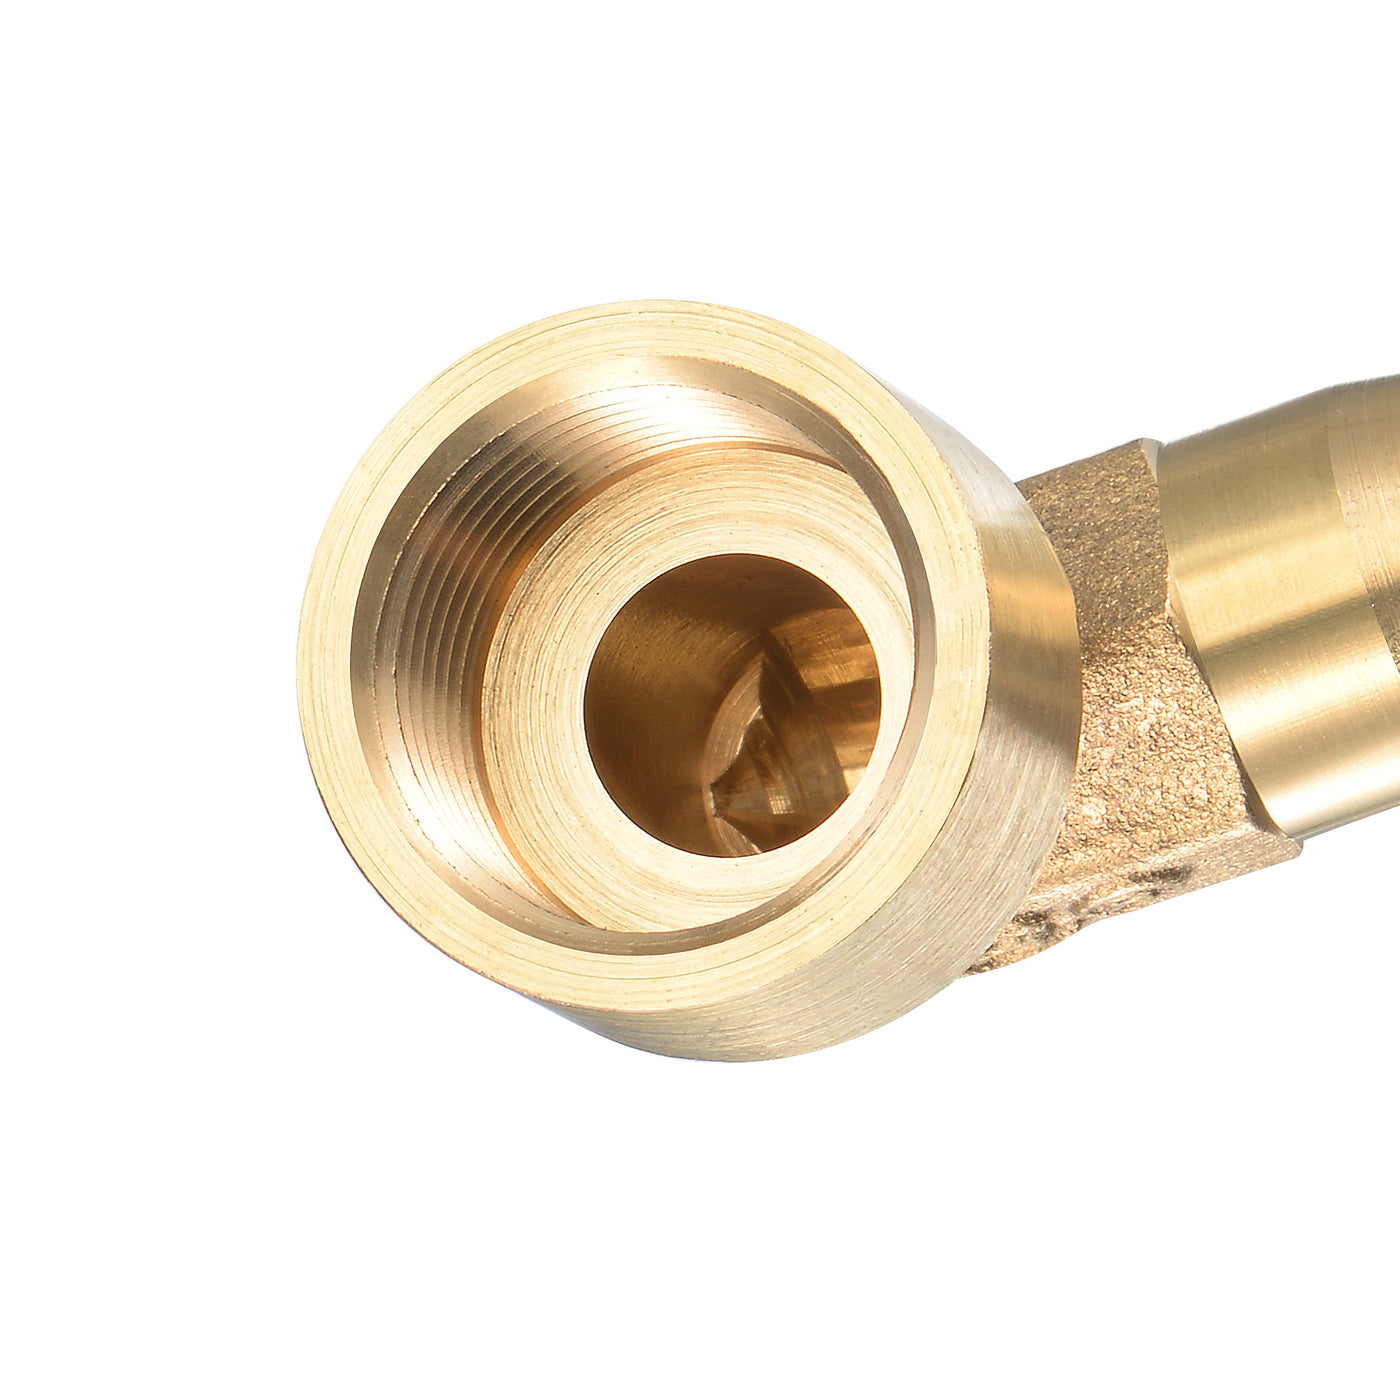 Uxcell Uxcell Brass Hose Barb Fitting Elbow 12mm x G3/8 Female Pipe Connector 2pcs